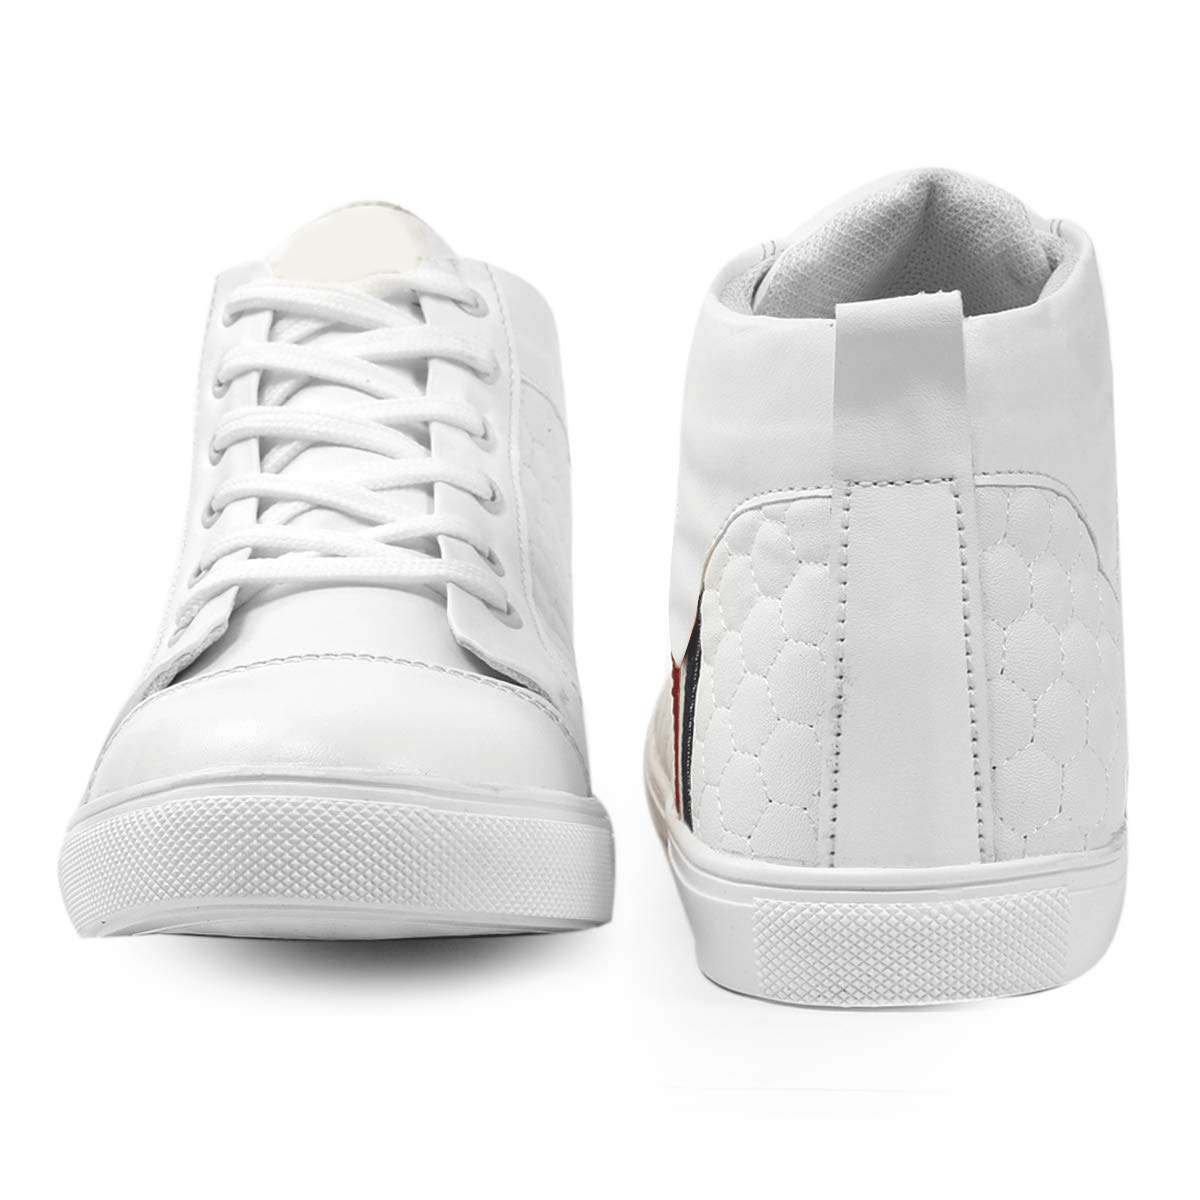 Latest Casual Sneakers in Lace-up With High Ankle Boot Form-Unique and Classy